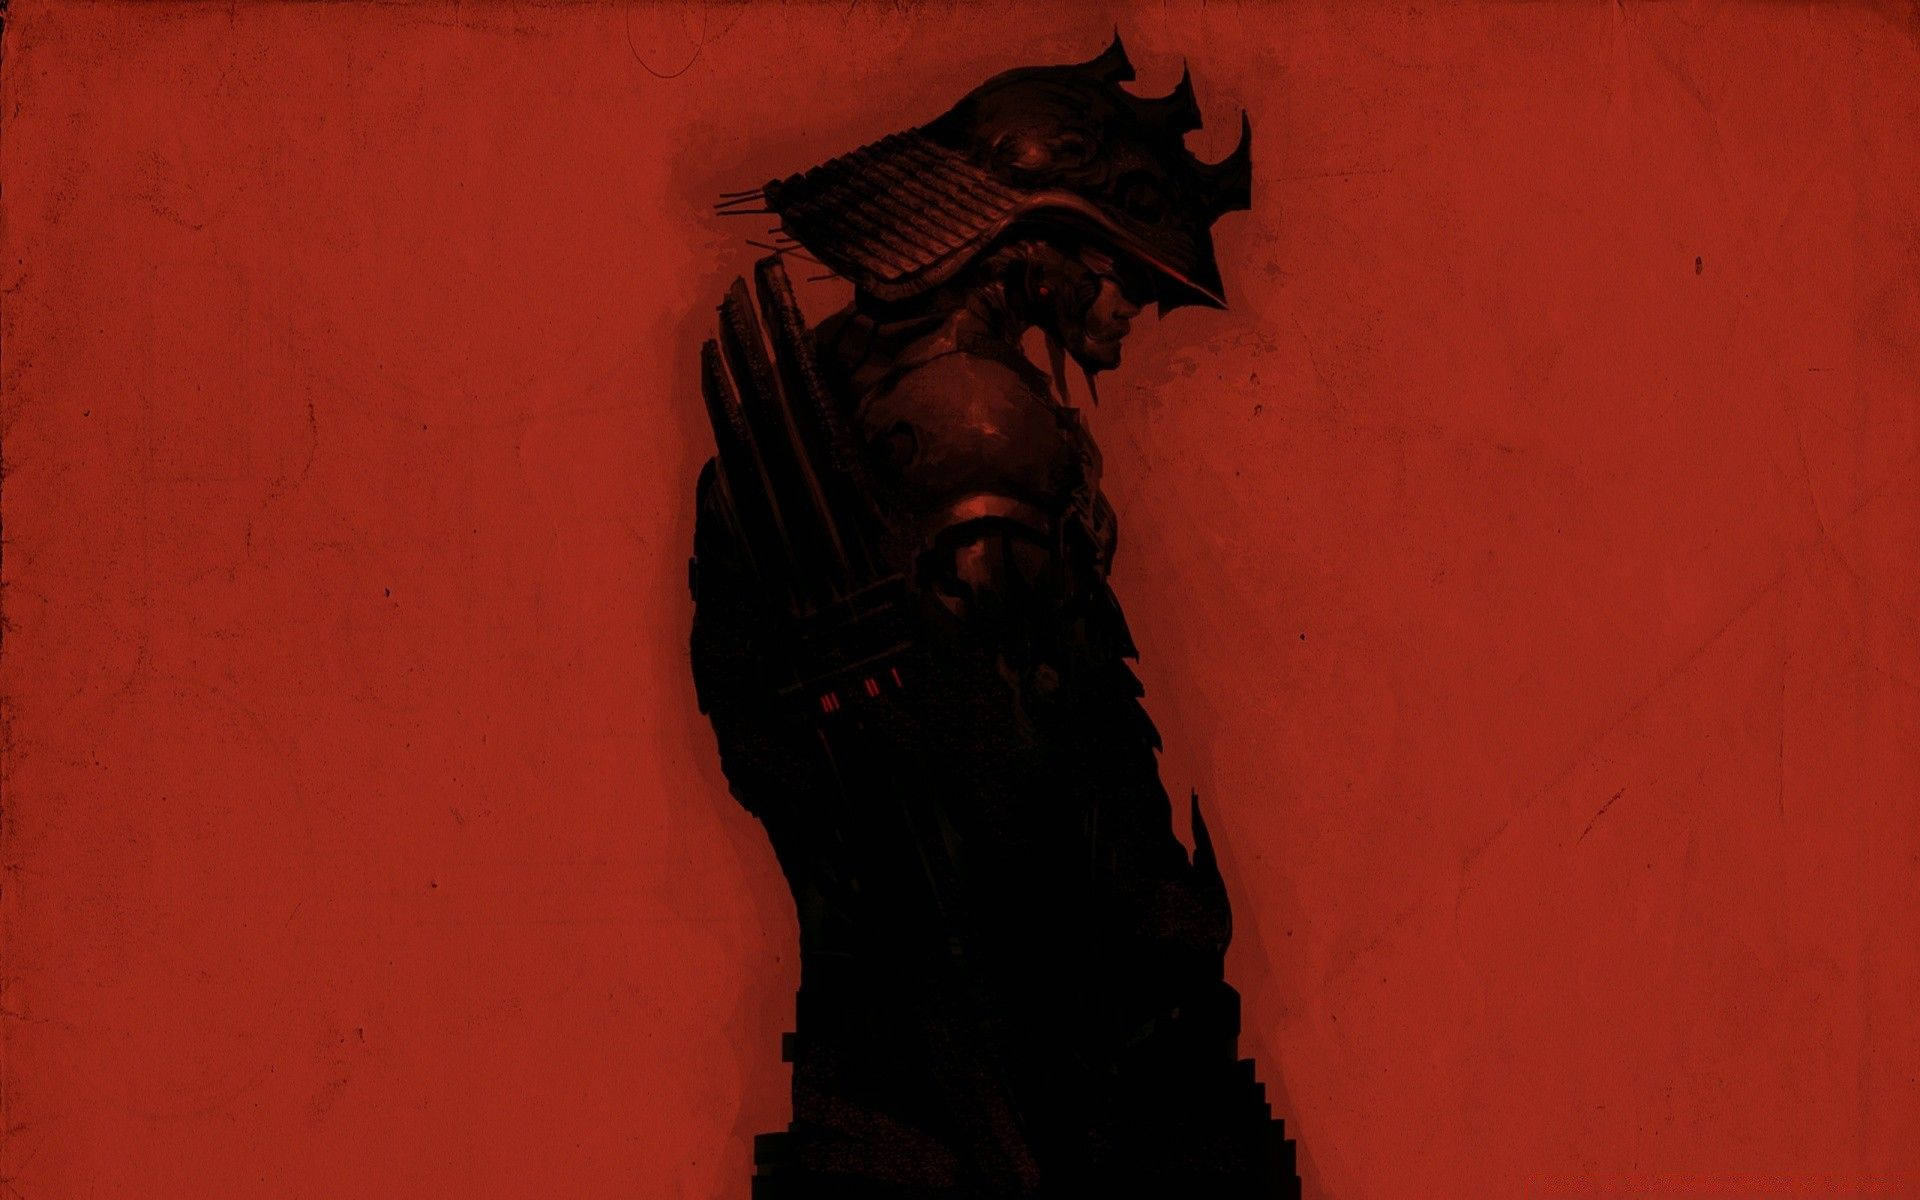 The Spirit of the Samurai Warrior is Alive in This Historical Art Piece Wallpaper